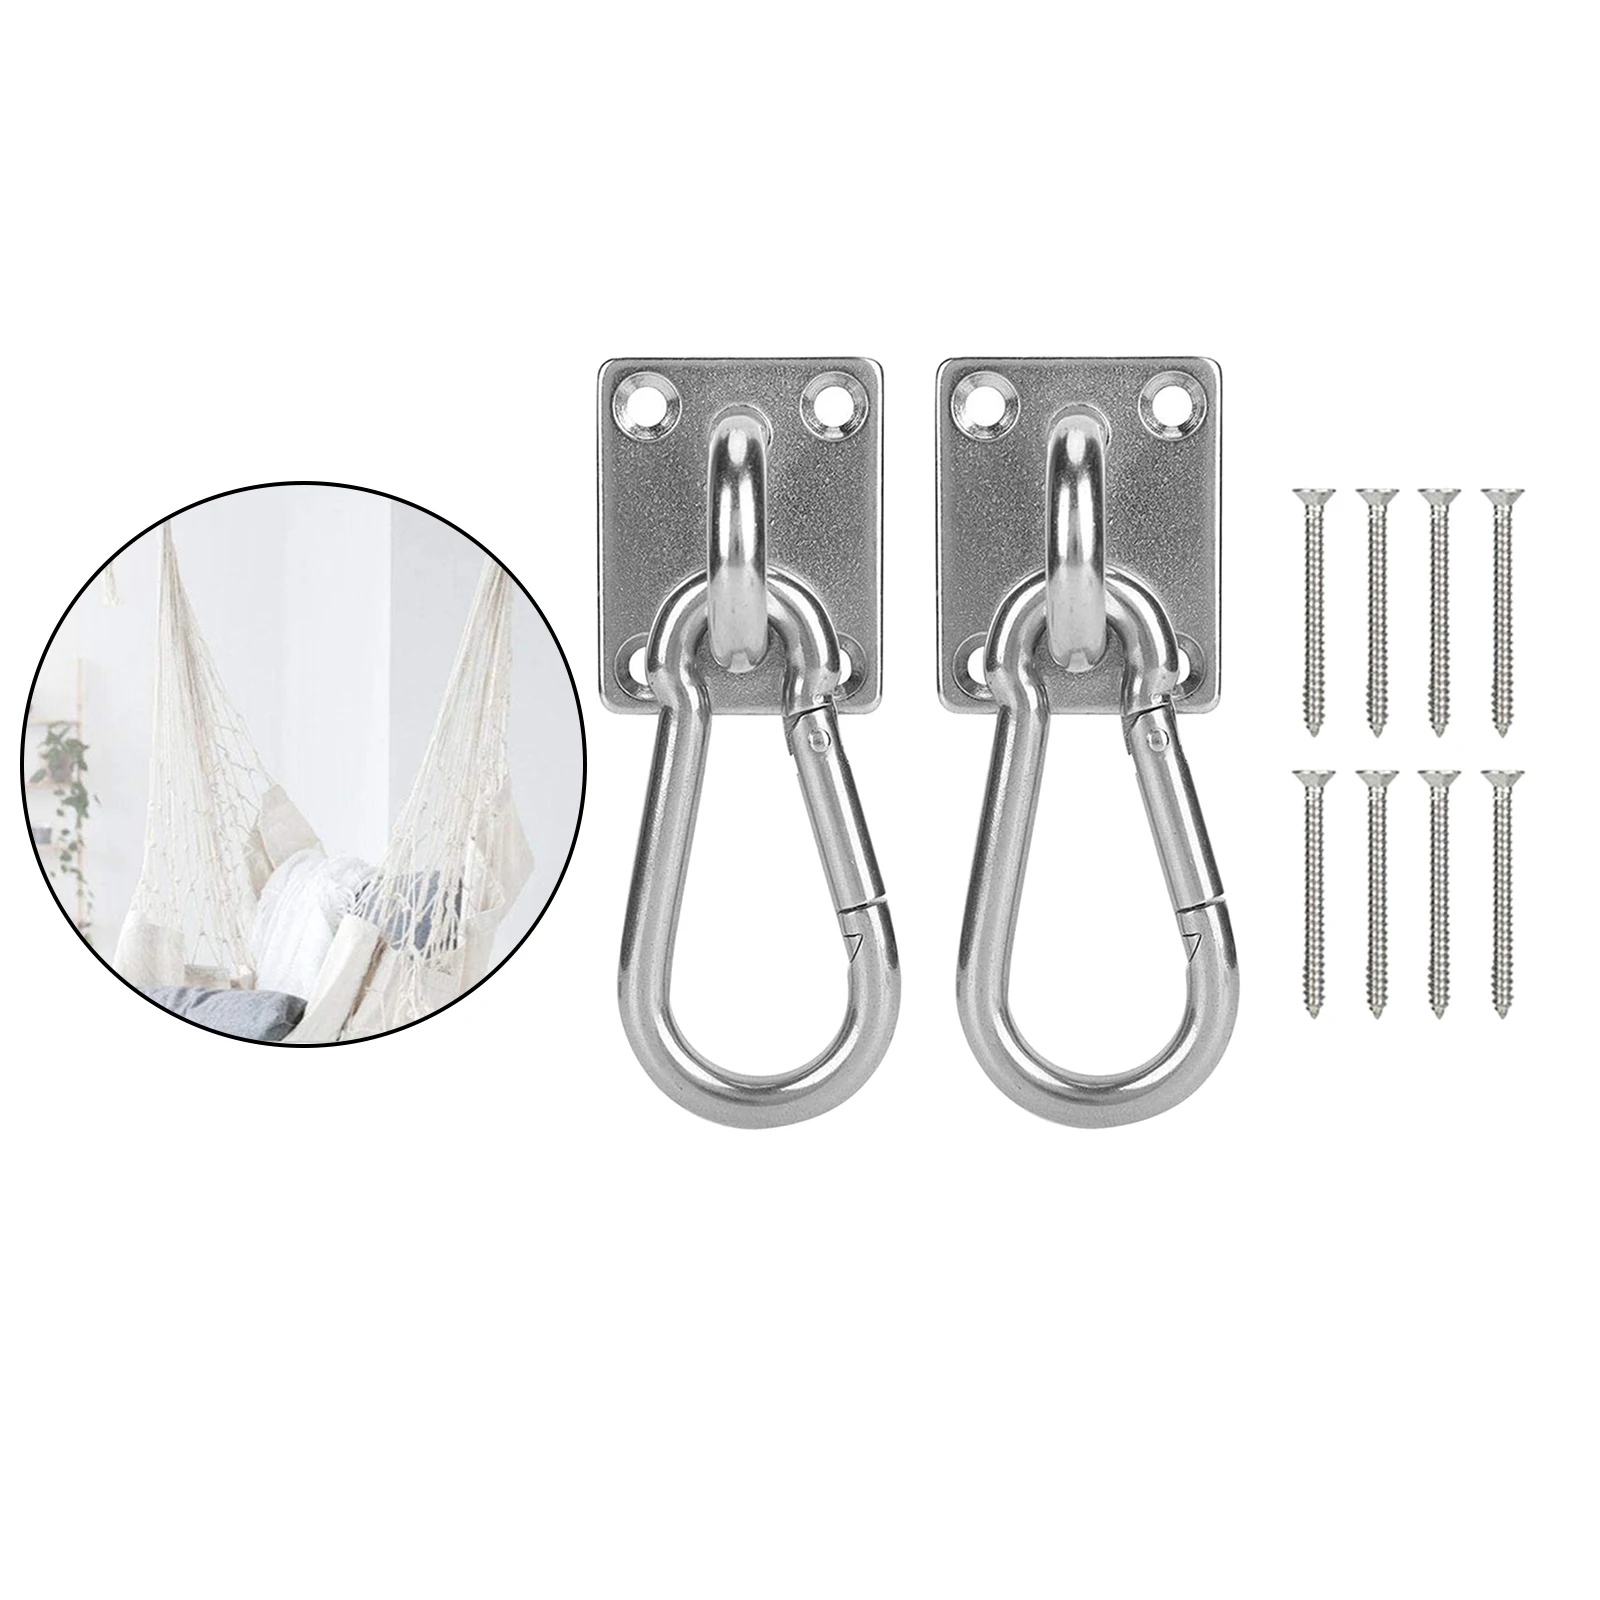 Stainless Steel Sturdy Ceiling Anchor Wall Mount ing Hook er Screws